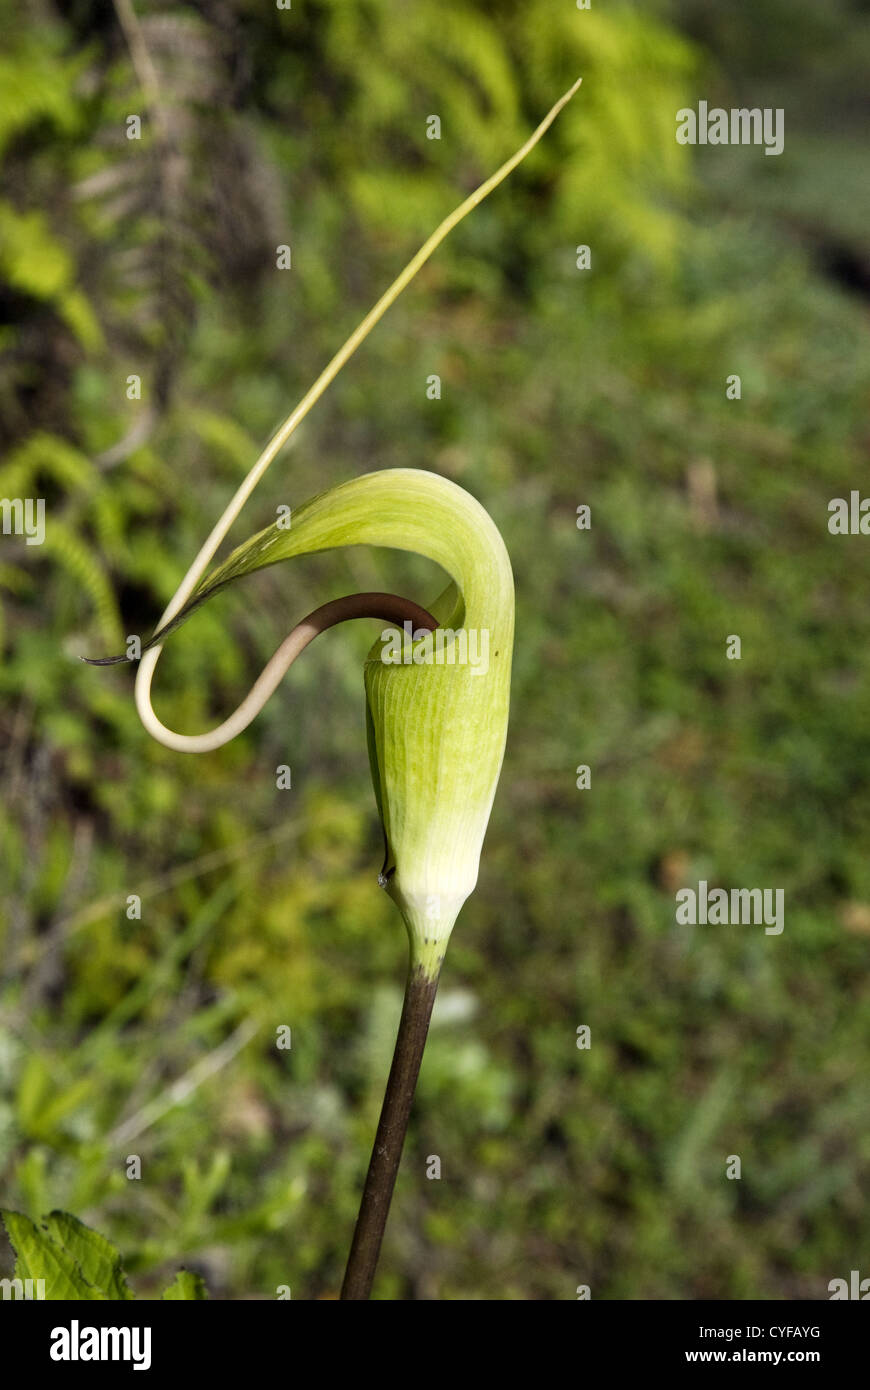 The Whipcord cobra lily stands tall, Tamang Heritage trail, Nepal Stock Photo